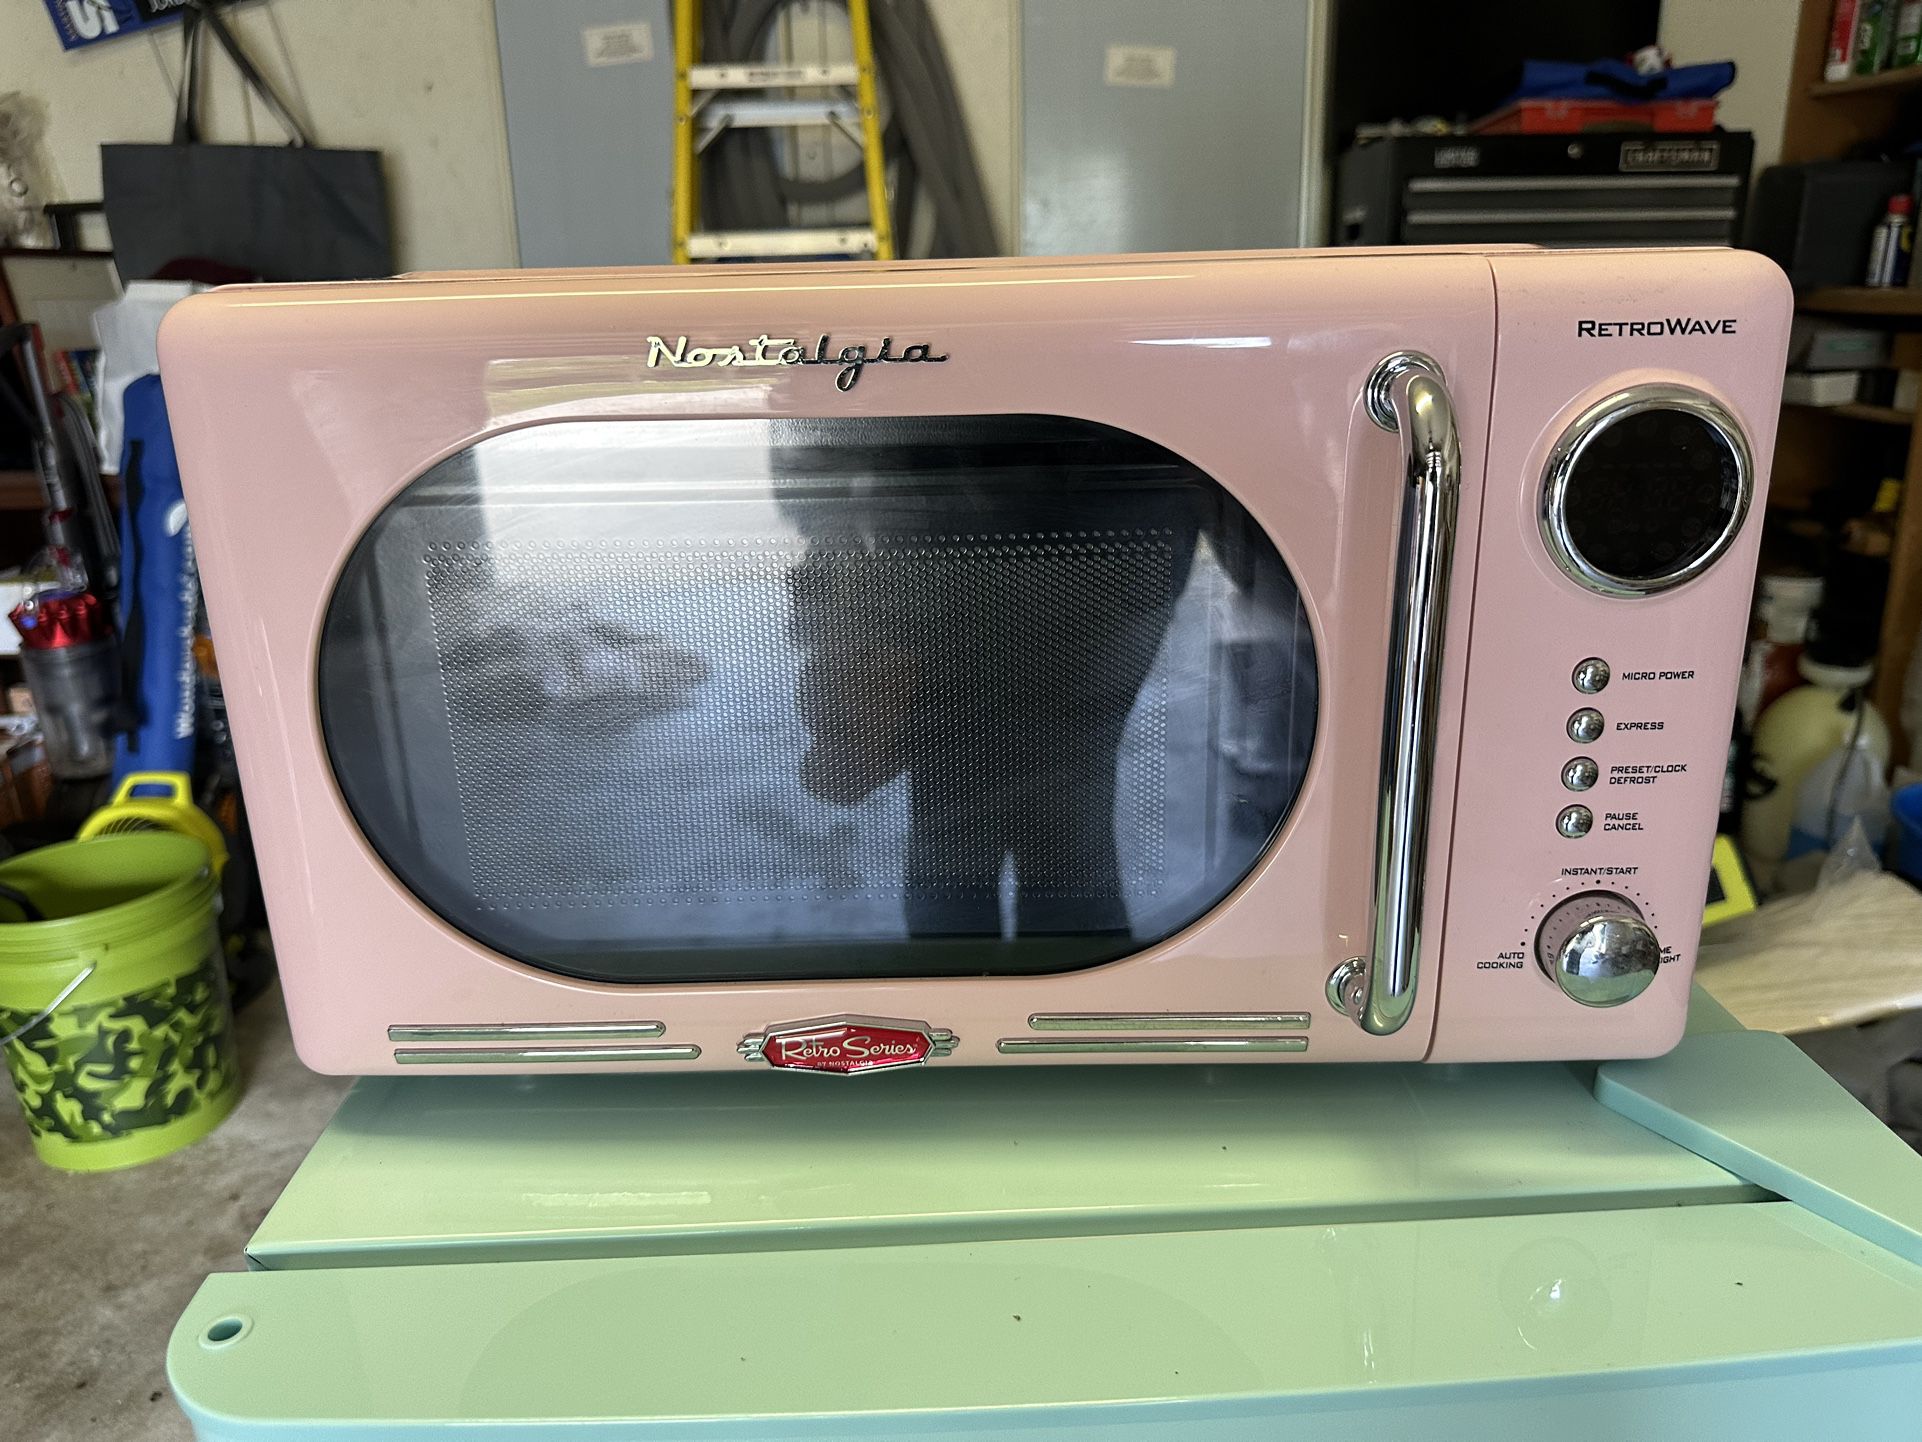 Nostalgia Retro series Countertop Microwave - Pink for Sale in Palm City,  FL - OfferUp